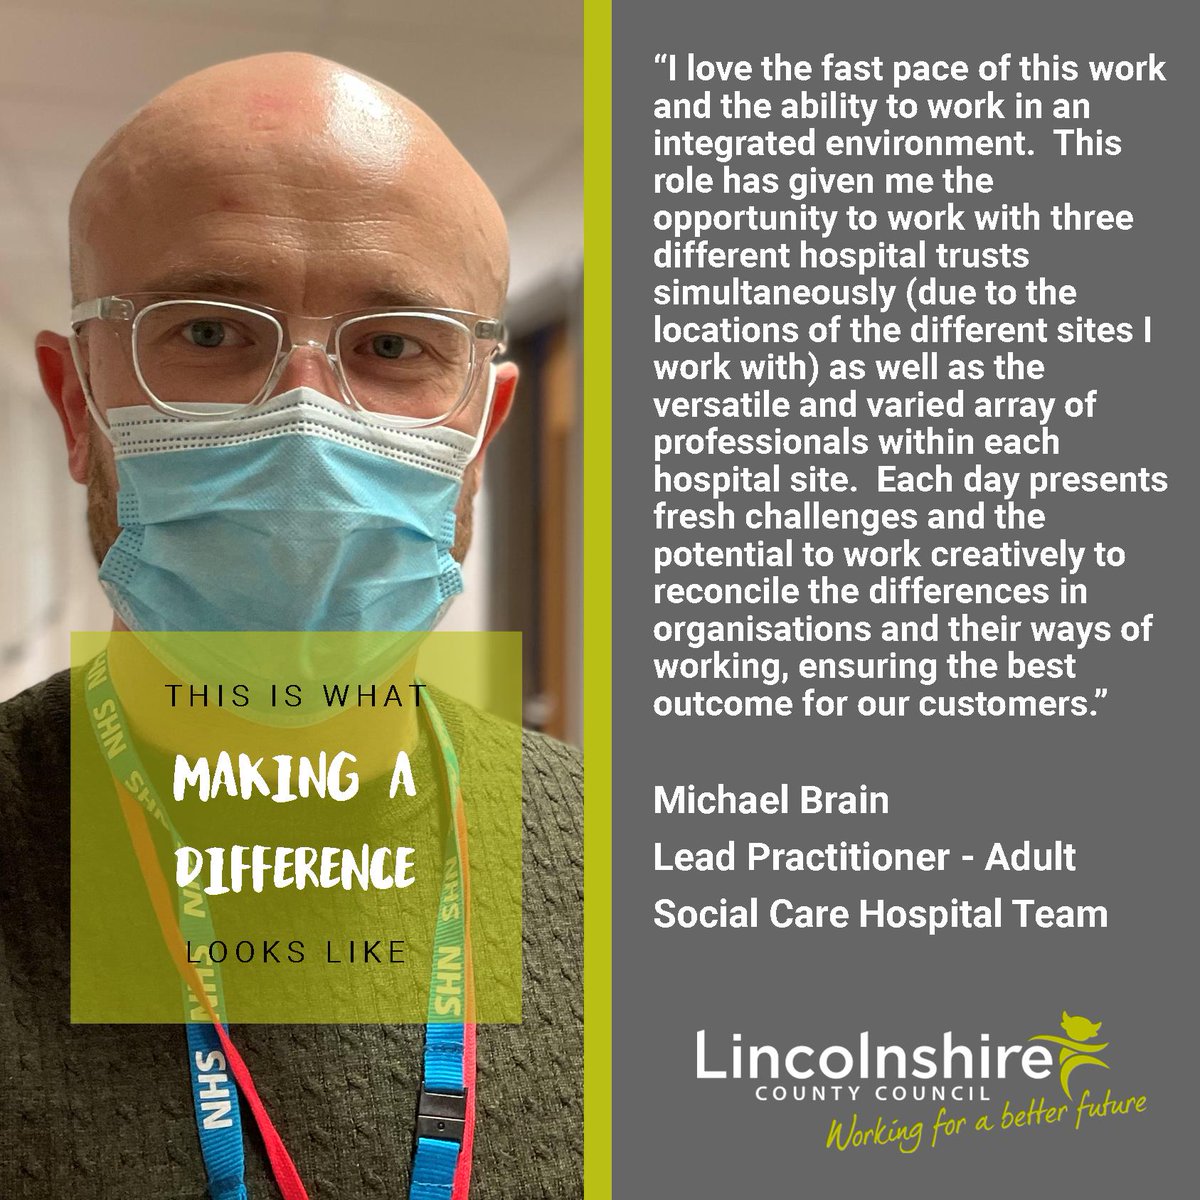 Come and join Michael in our Adult Social Care Hospital Team. We are recruiting for Lead Practitioners and Social Workers now! qoo.ly/3amtp9 #socialwork #Socialcare #recruiting #recruitment #Lincolnshire